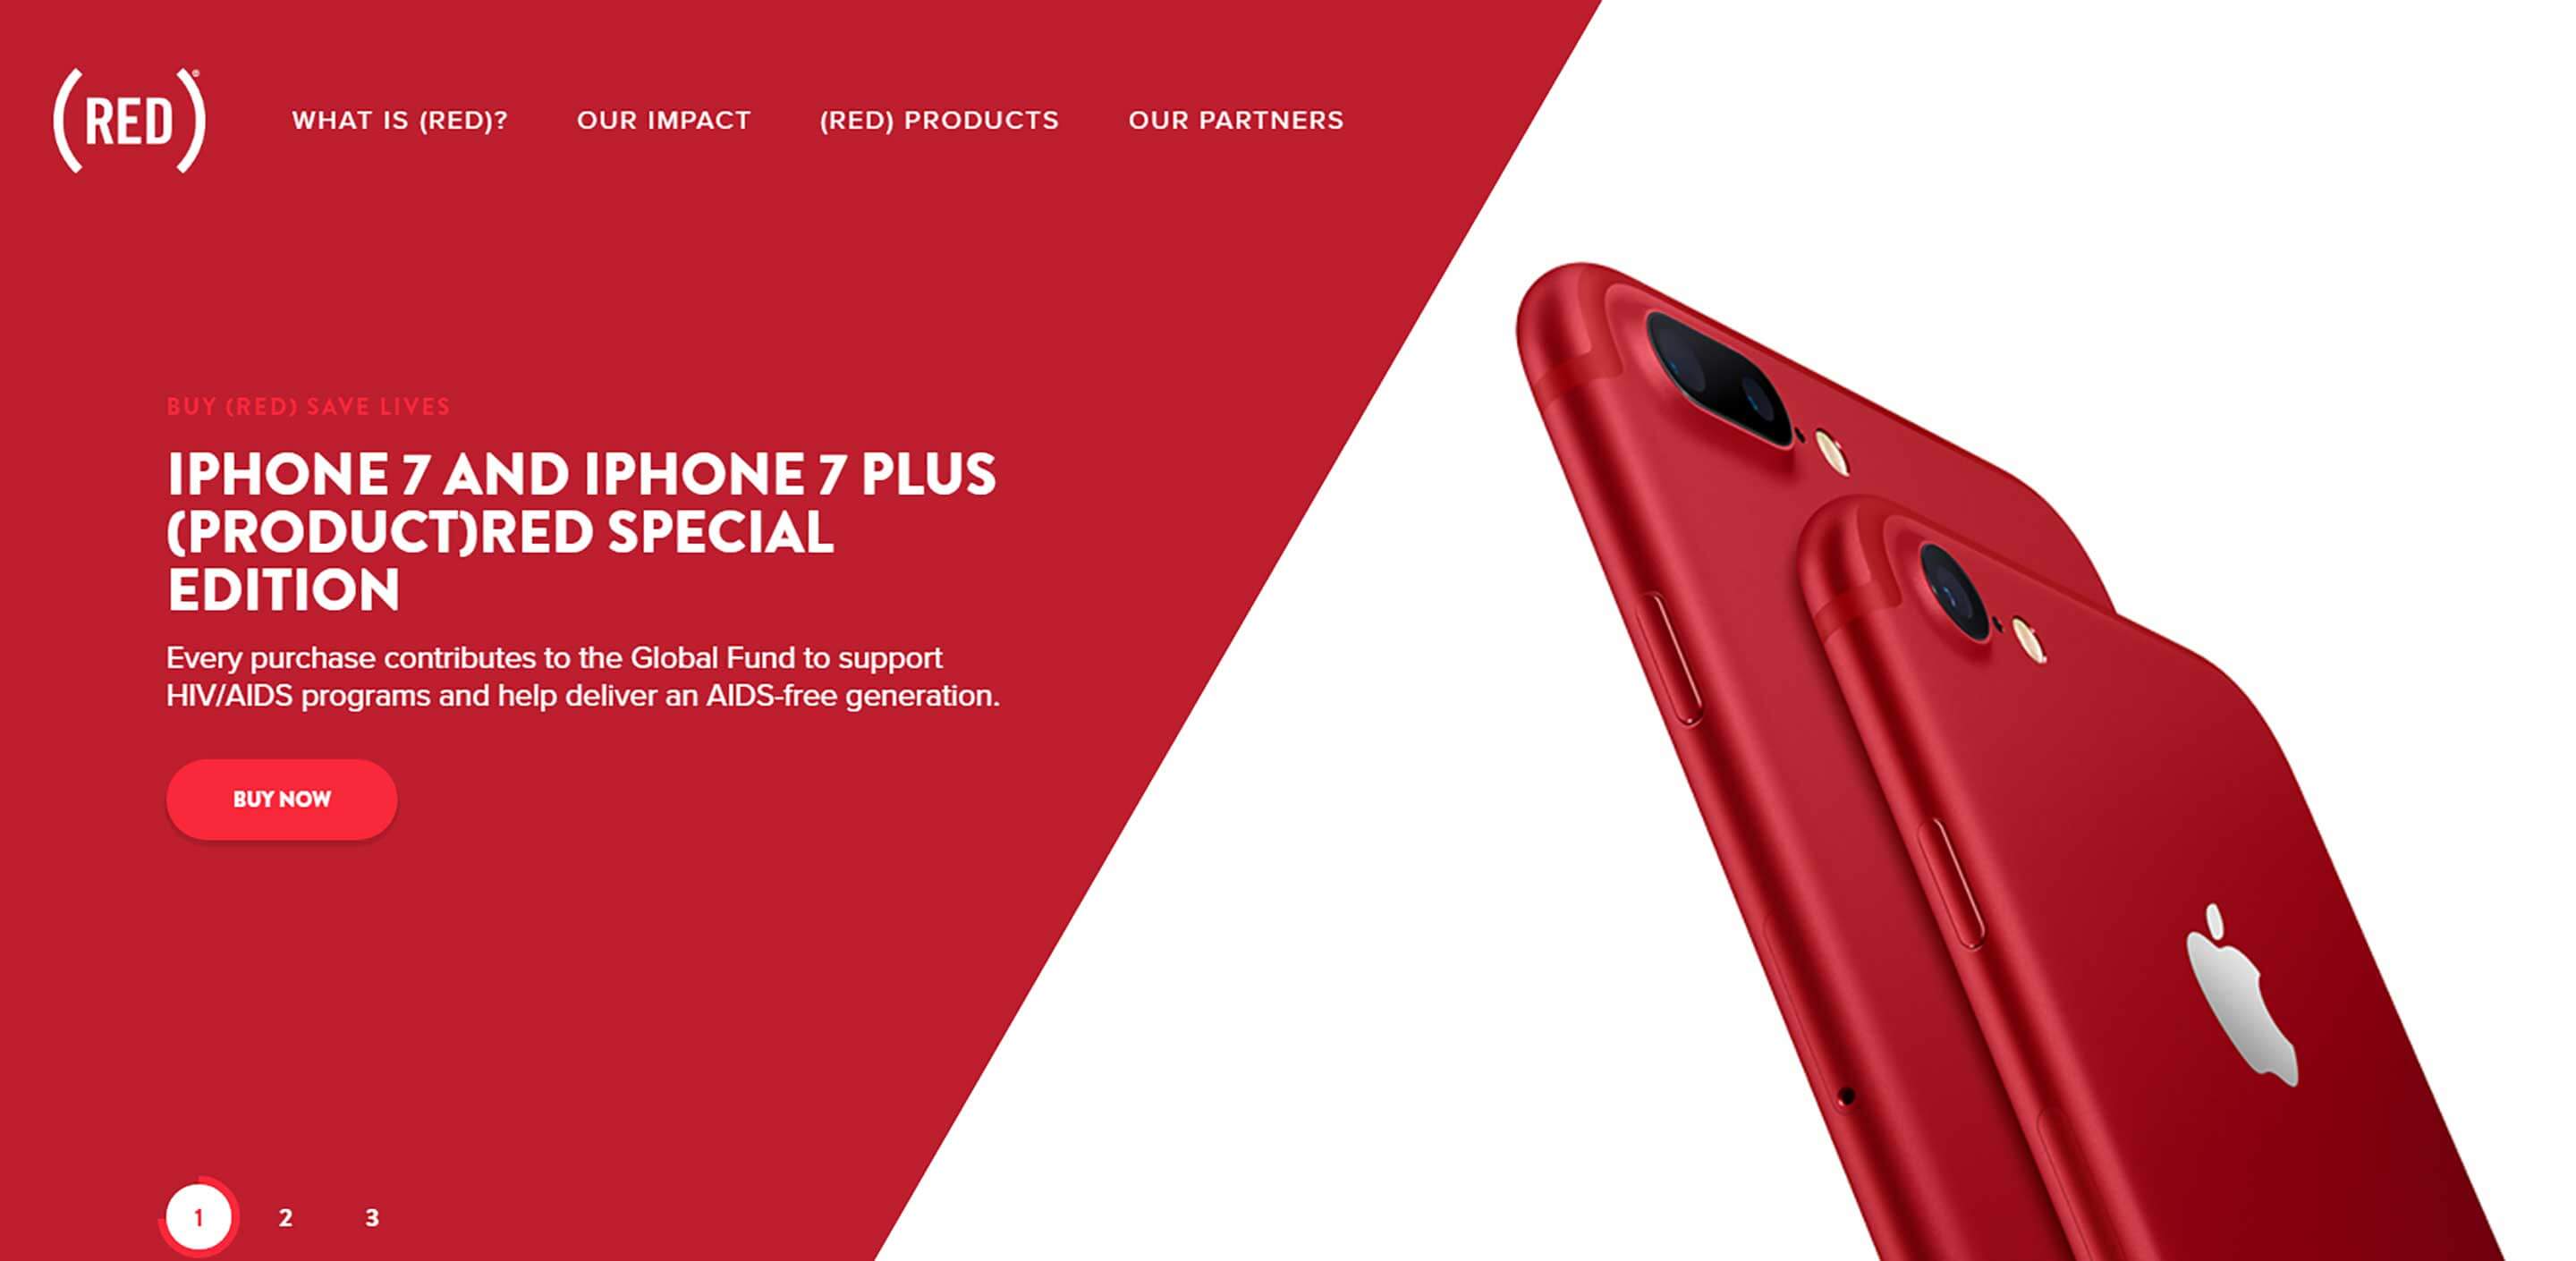 7 Key Steps of Brand Strategy Development Exemplified by iPhone 7 RED